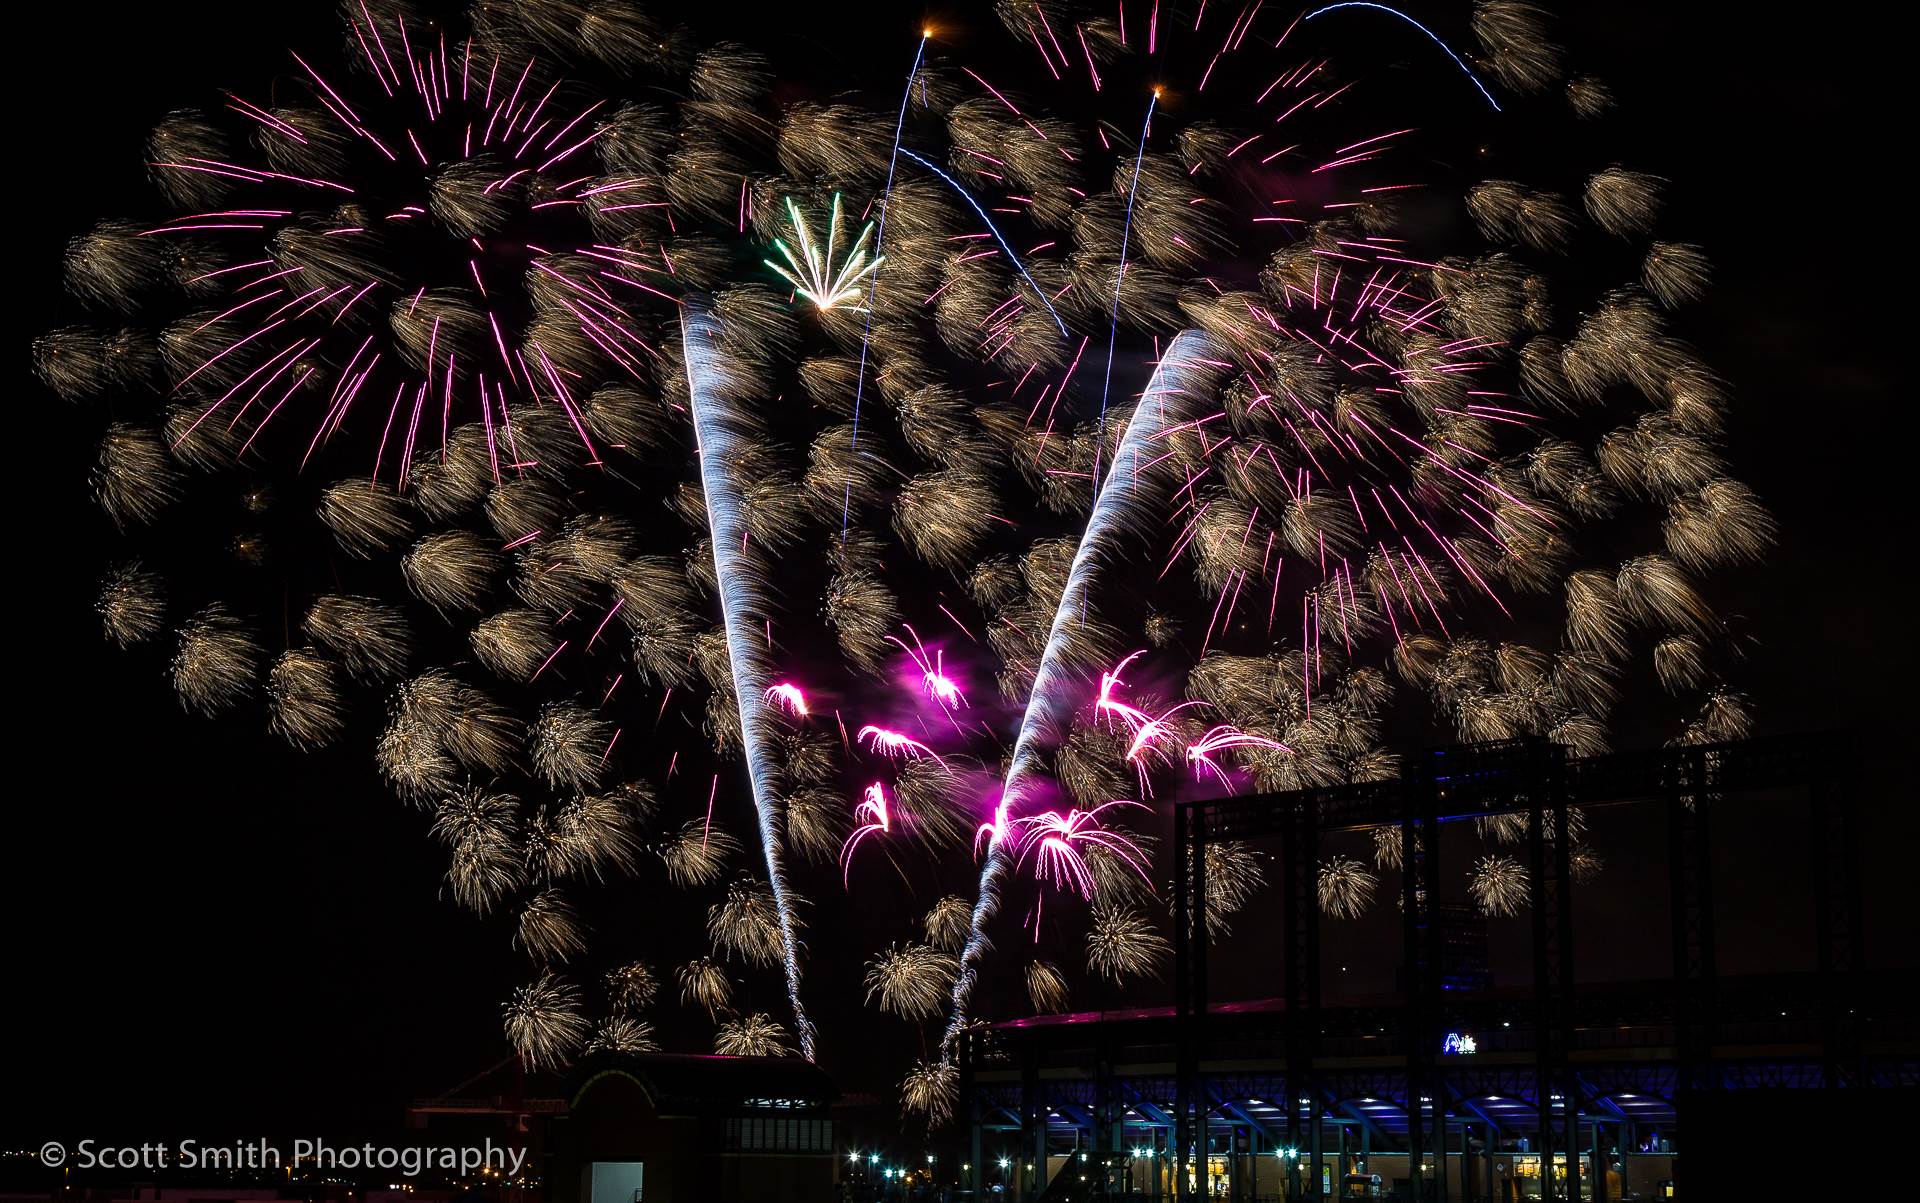 Fireworks over Coors Field 4 Fourth of July fireworks over Coors Field after a Colorado Rockies game. by Scott Smith Photos